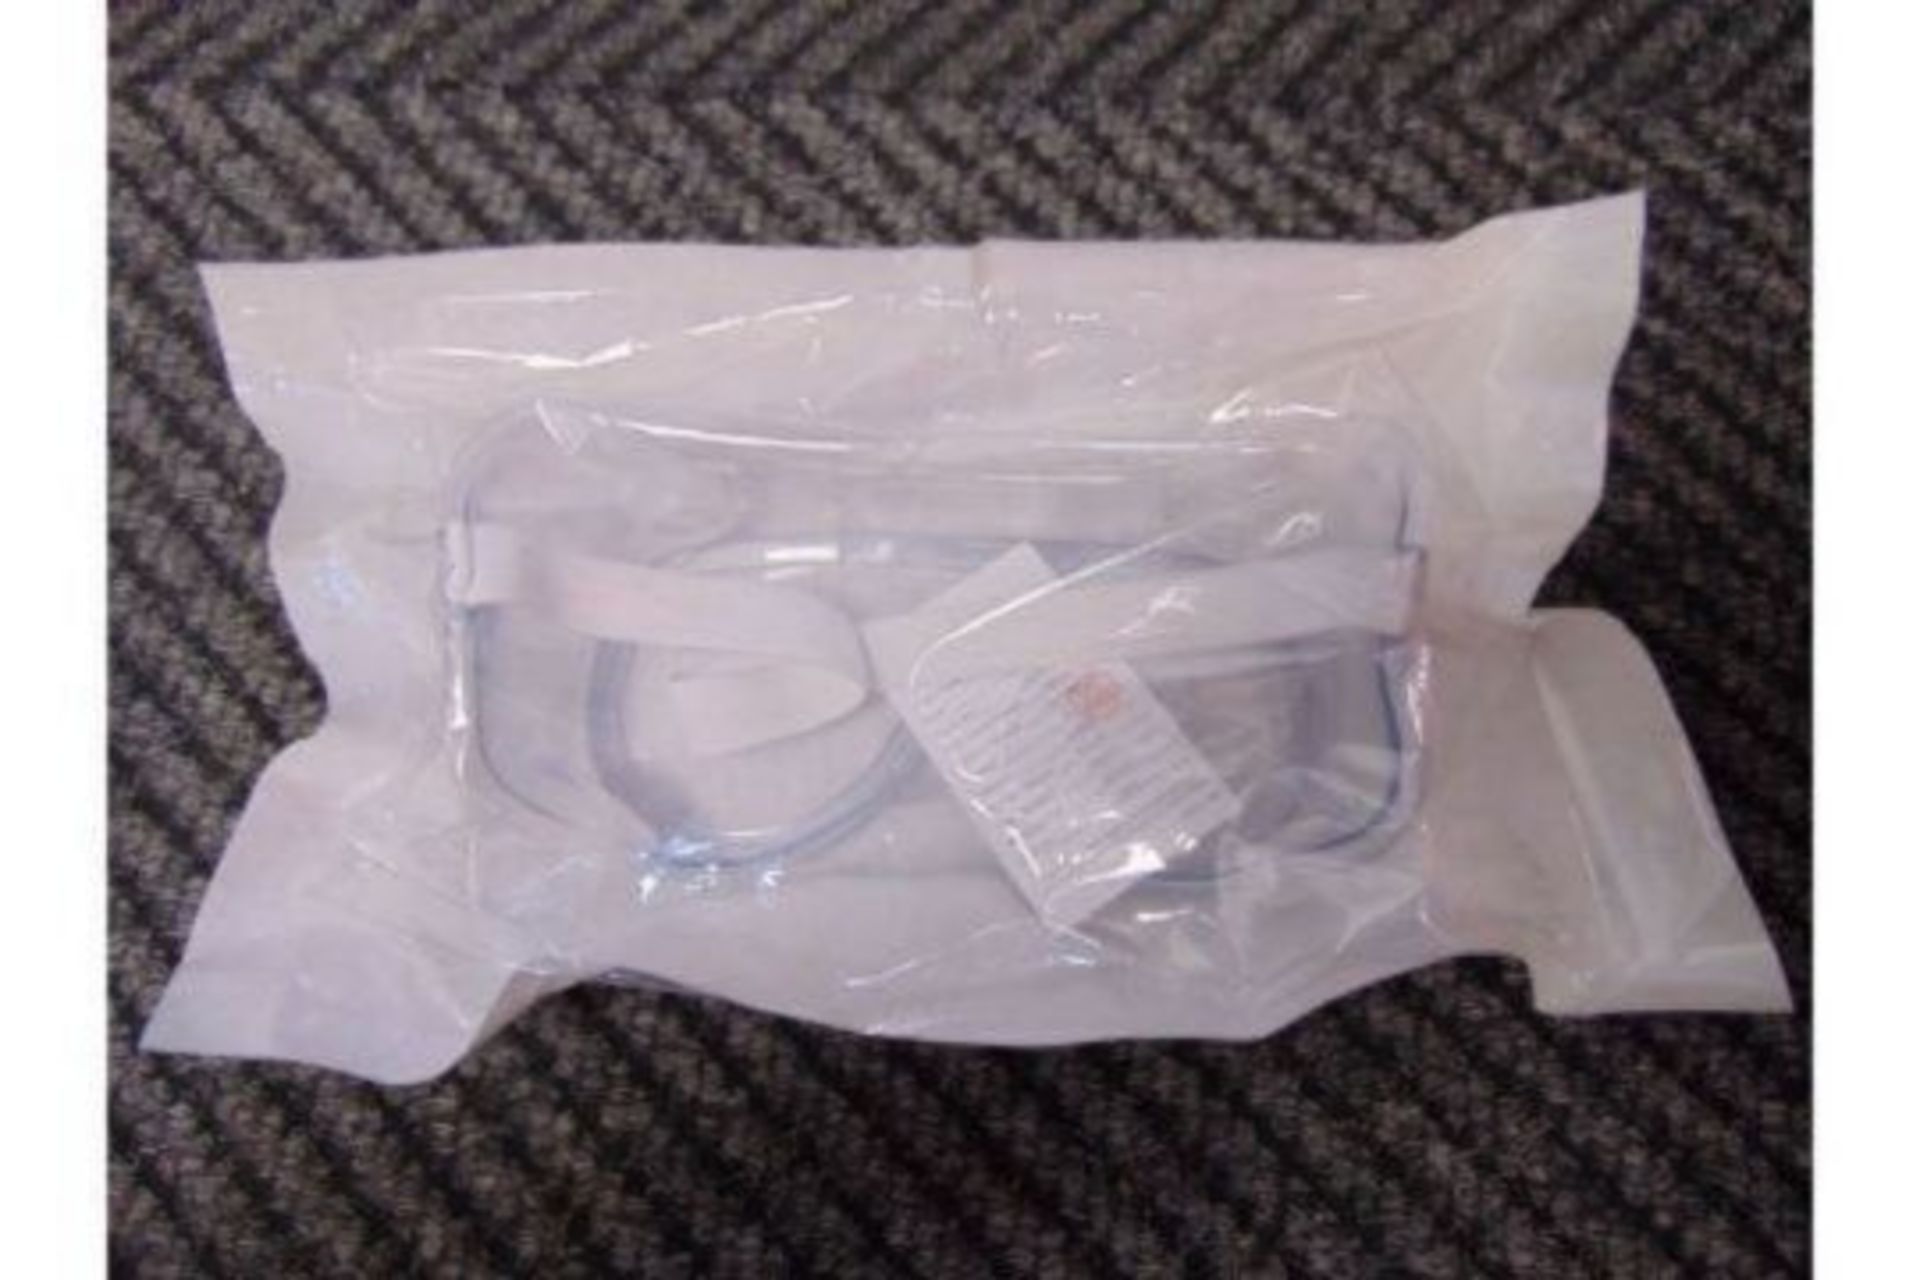 1440 Protective Goggles GLYZ1-1, 1 Pallet (18 Boxes, 80 per box) New Unissued Reserve Stock - Image 11 of 16